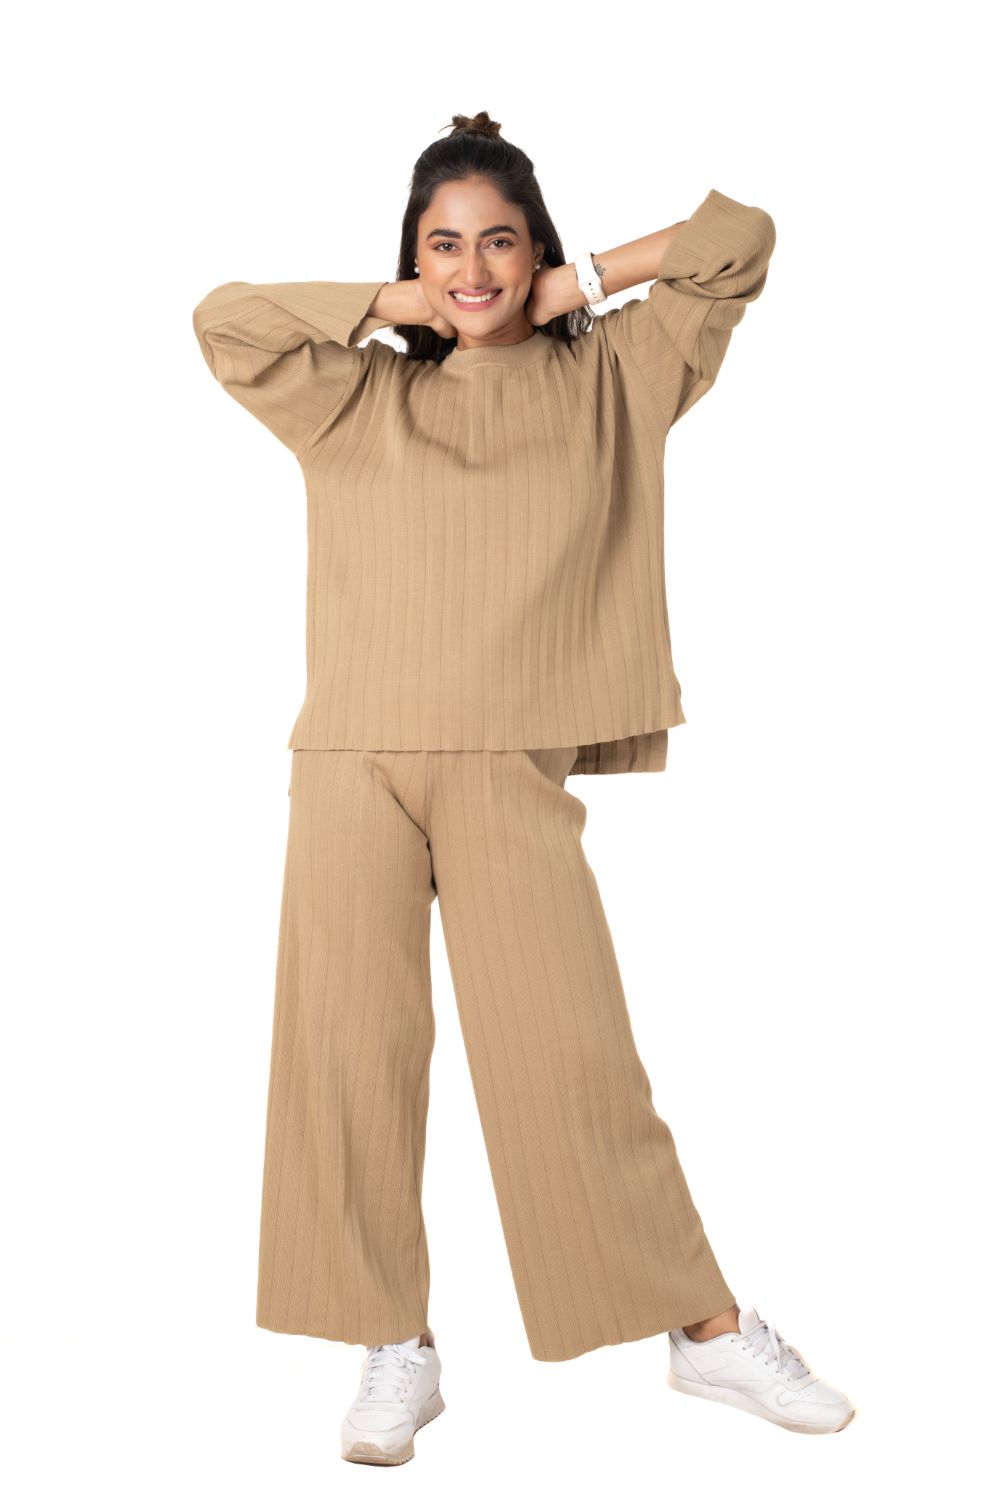 Cosy Classic Divaa Co-ord Set full sleeve light mud yellow lounge wear featured